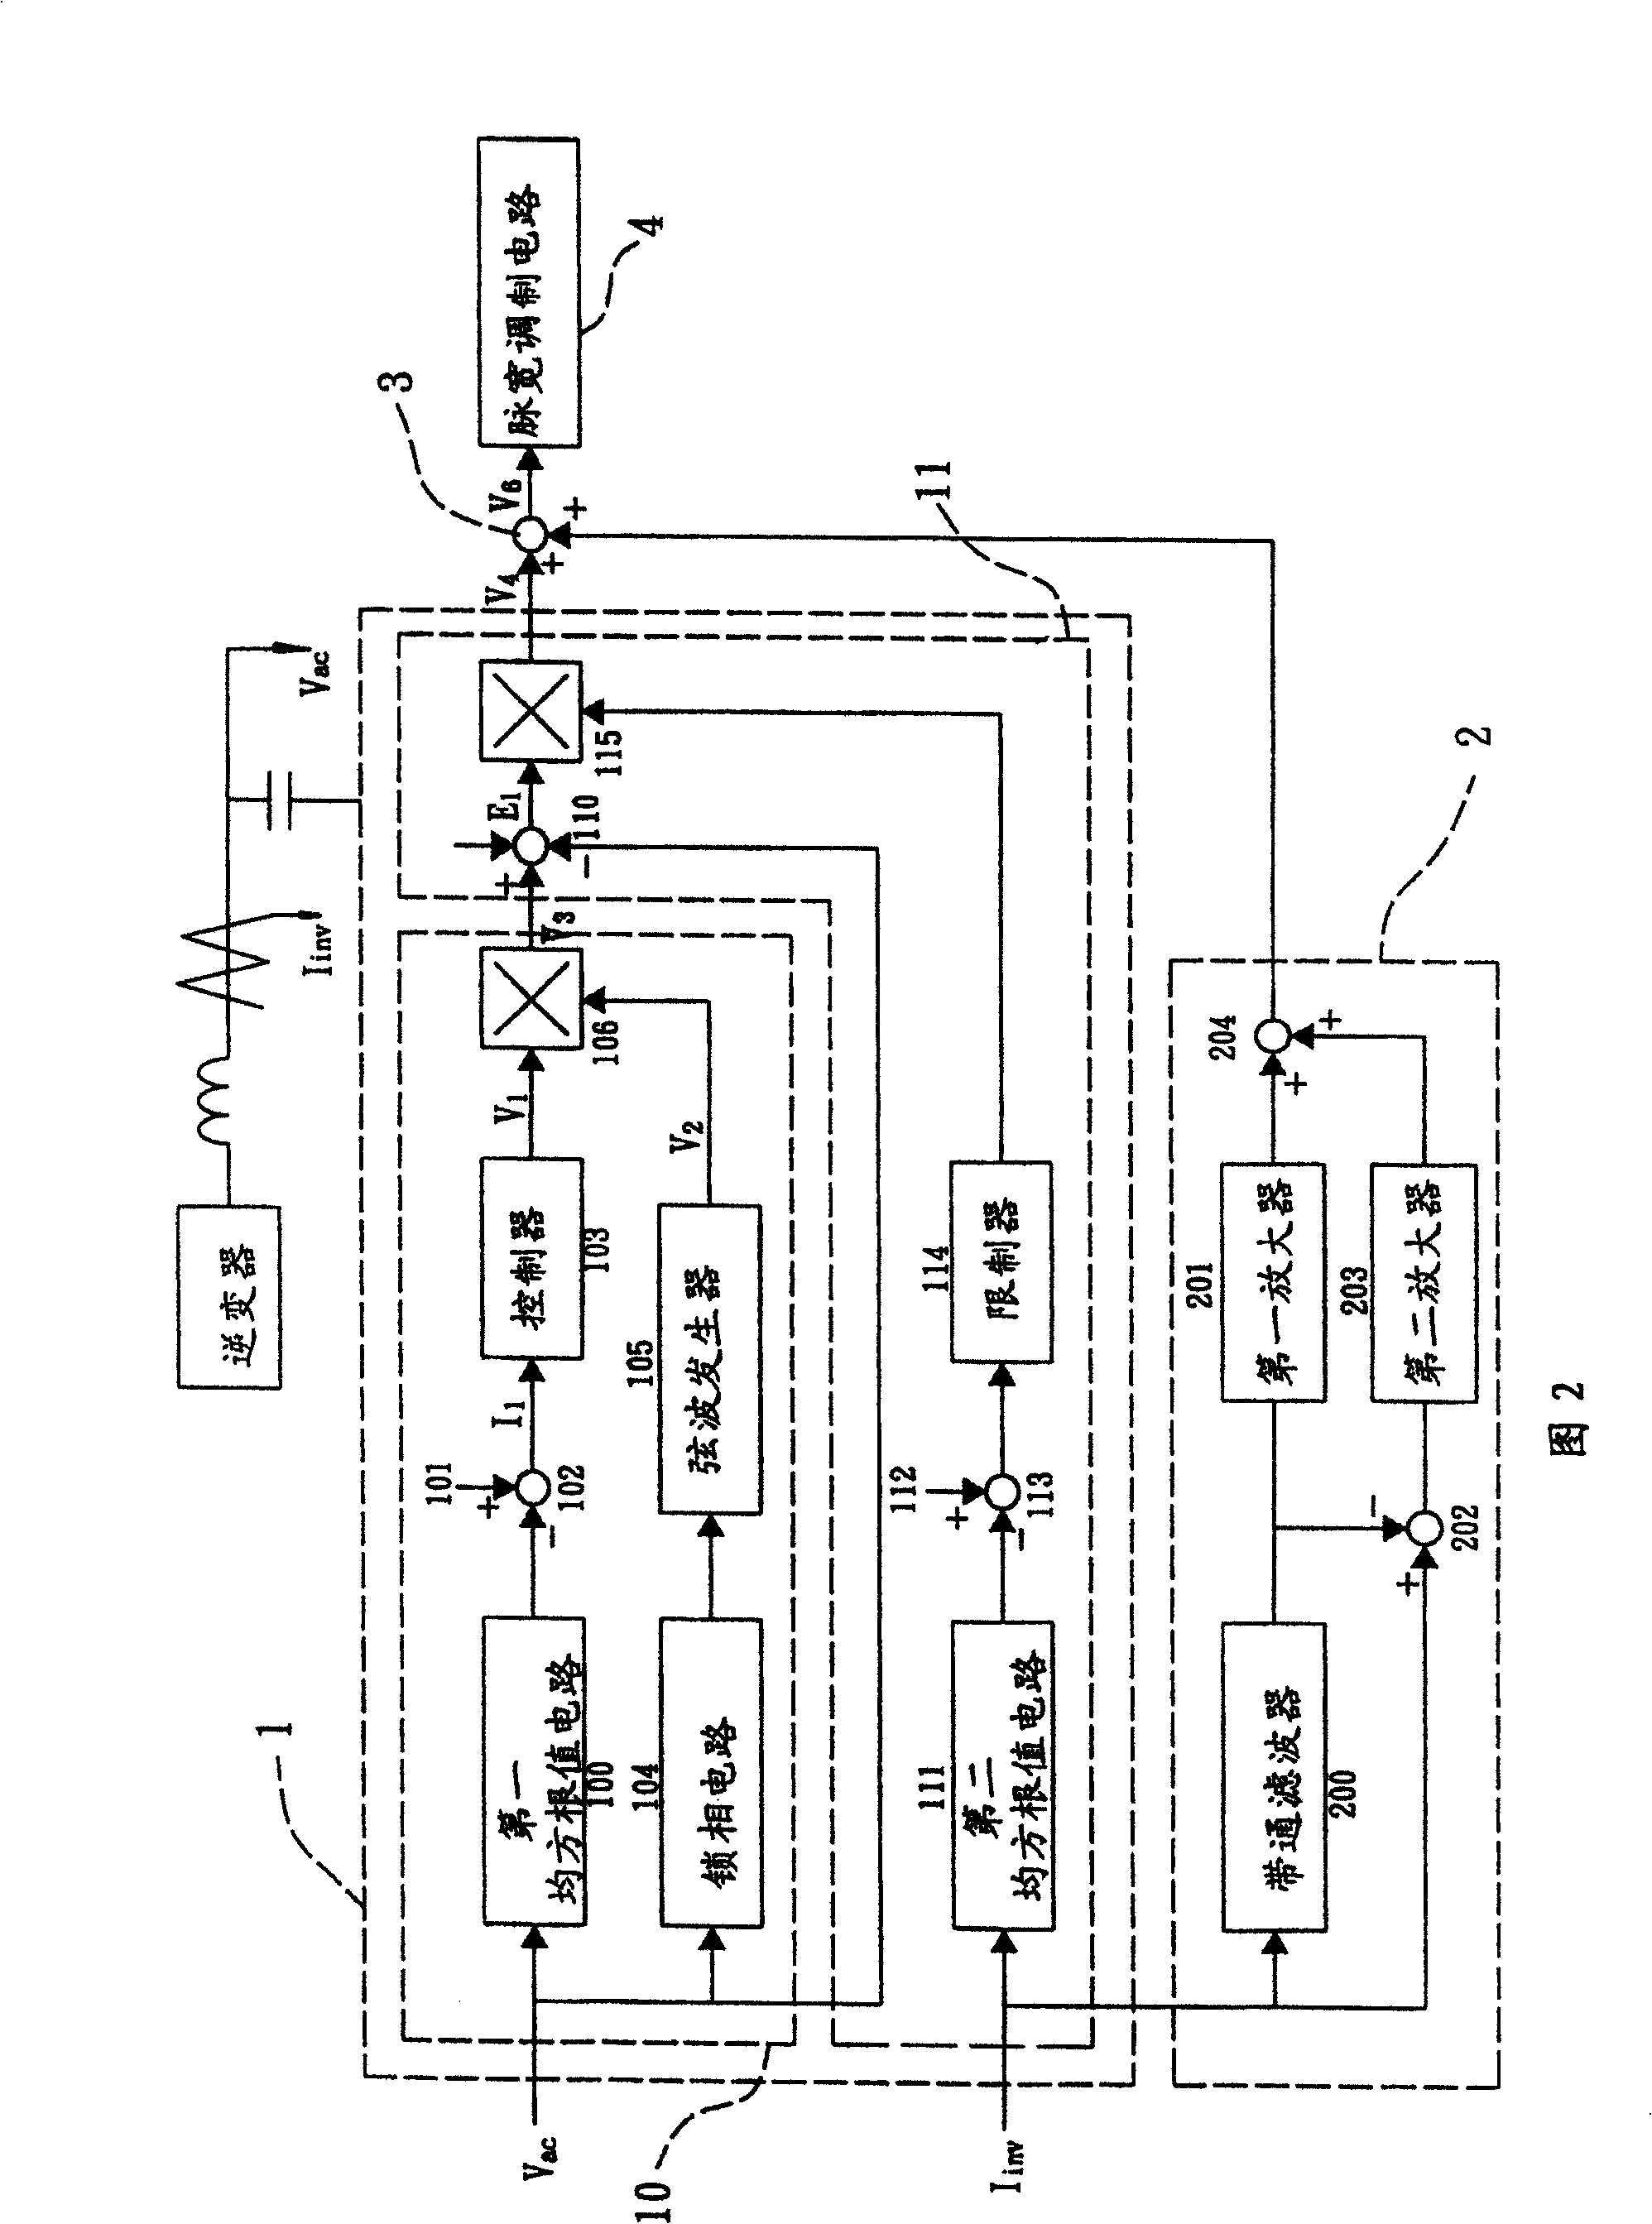 Method for controlling parallel operation of current transformer